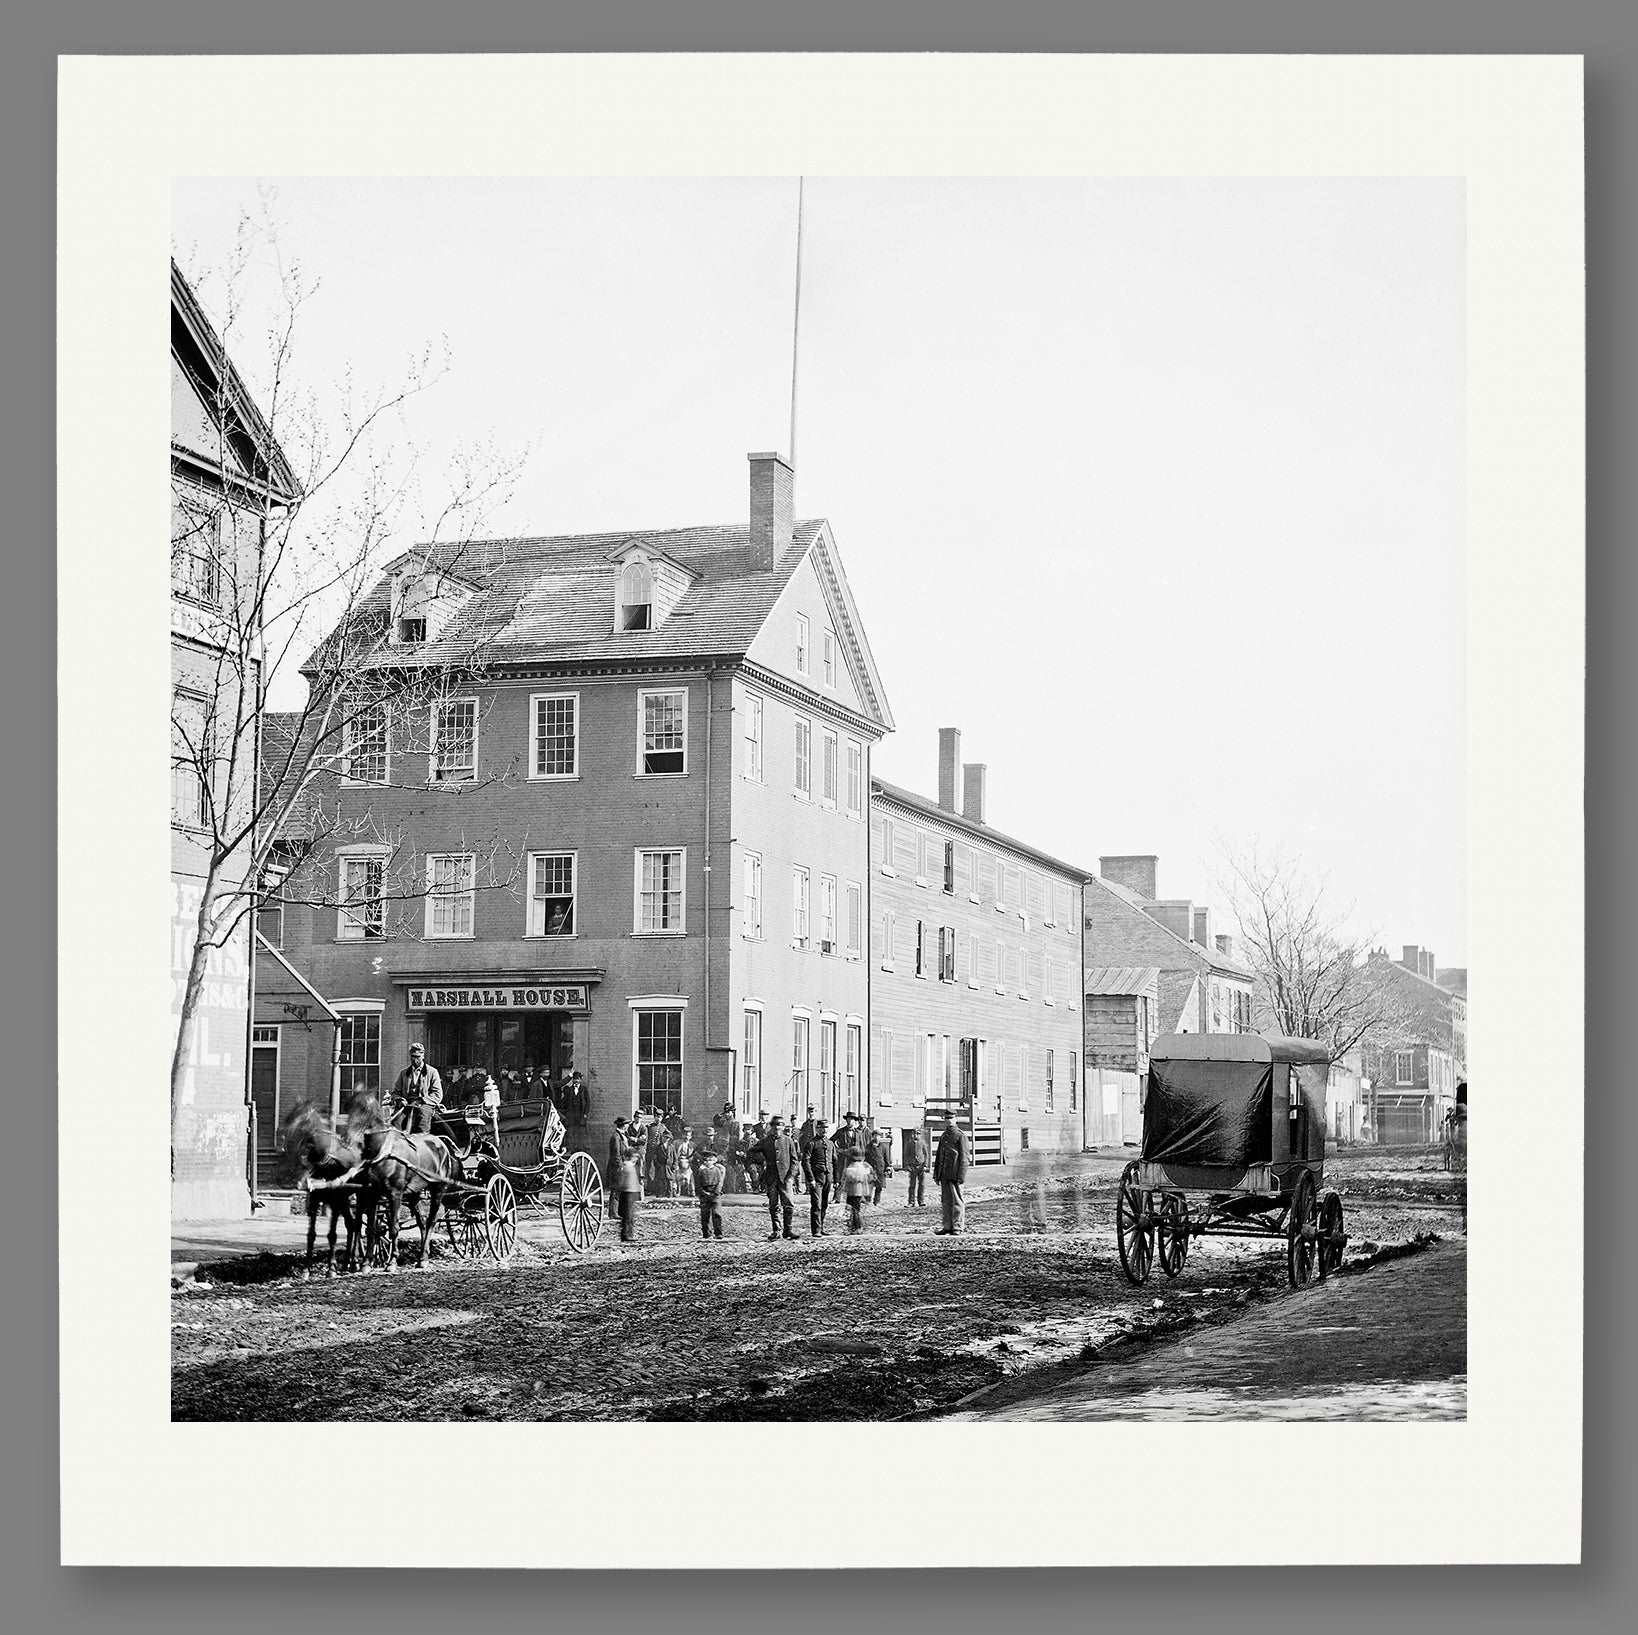 A mockup paper print reproduction of a vintage photograph of Old Town's Marshall House